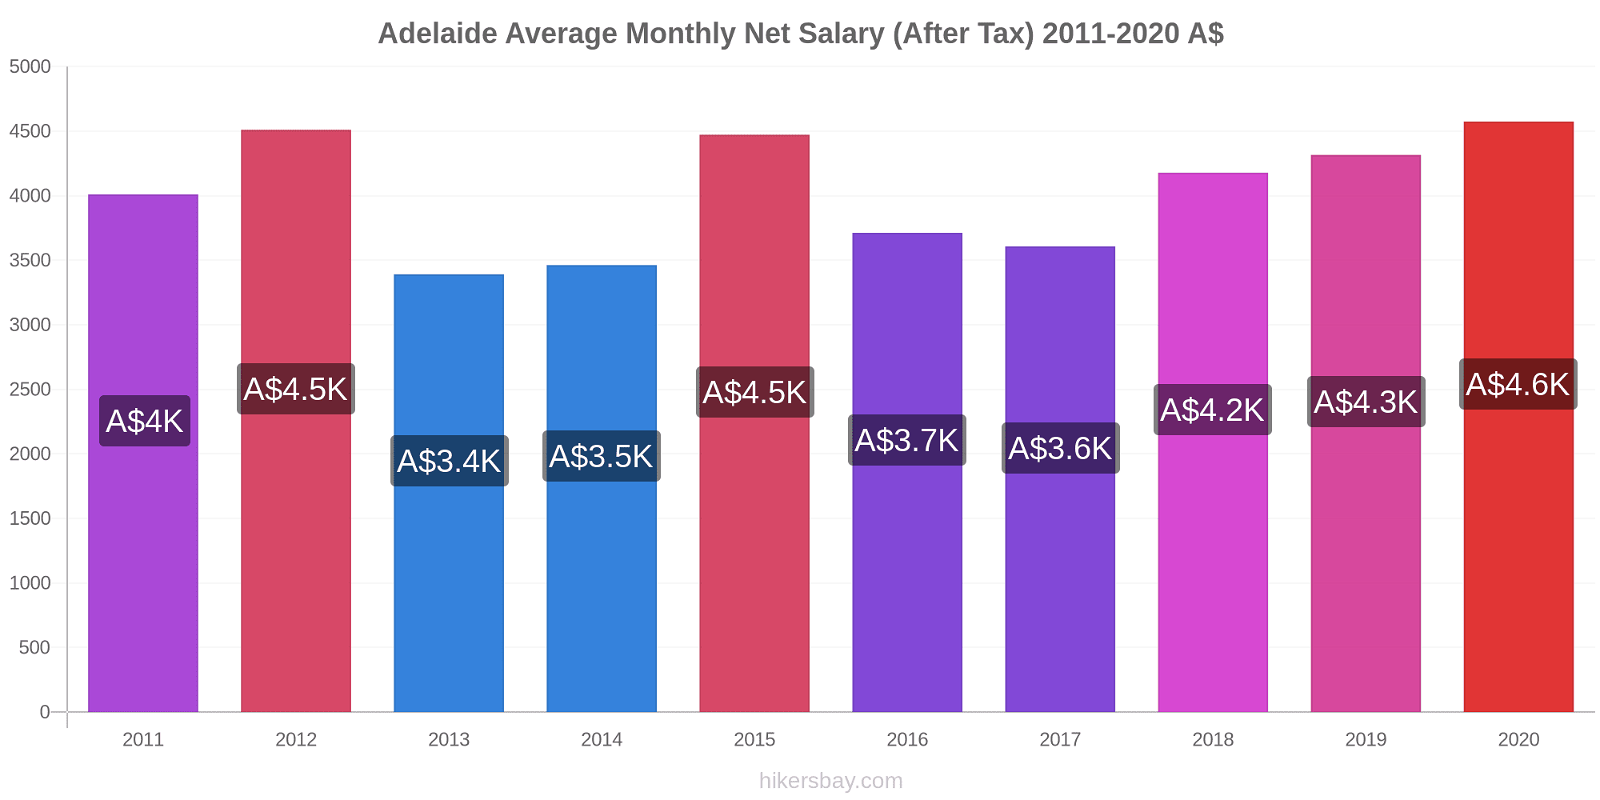 Adelaide price changes Average Monthly Net Salary (After Tax) hikersbay.com